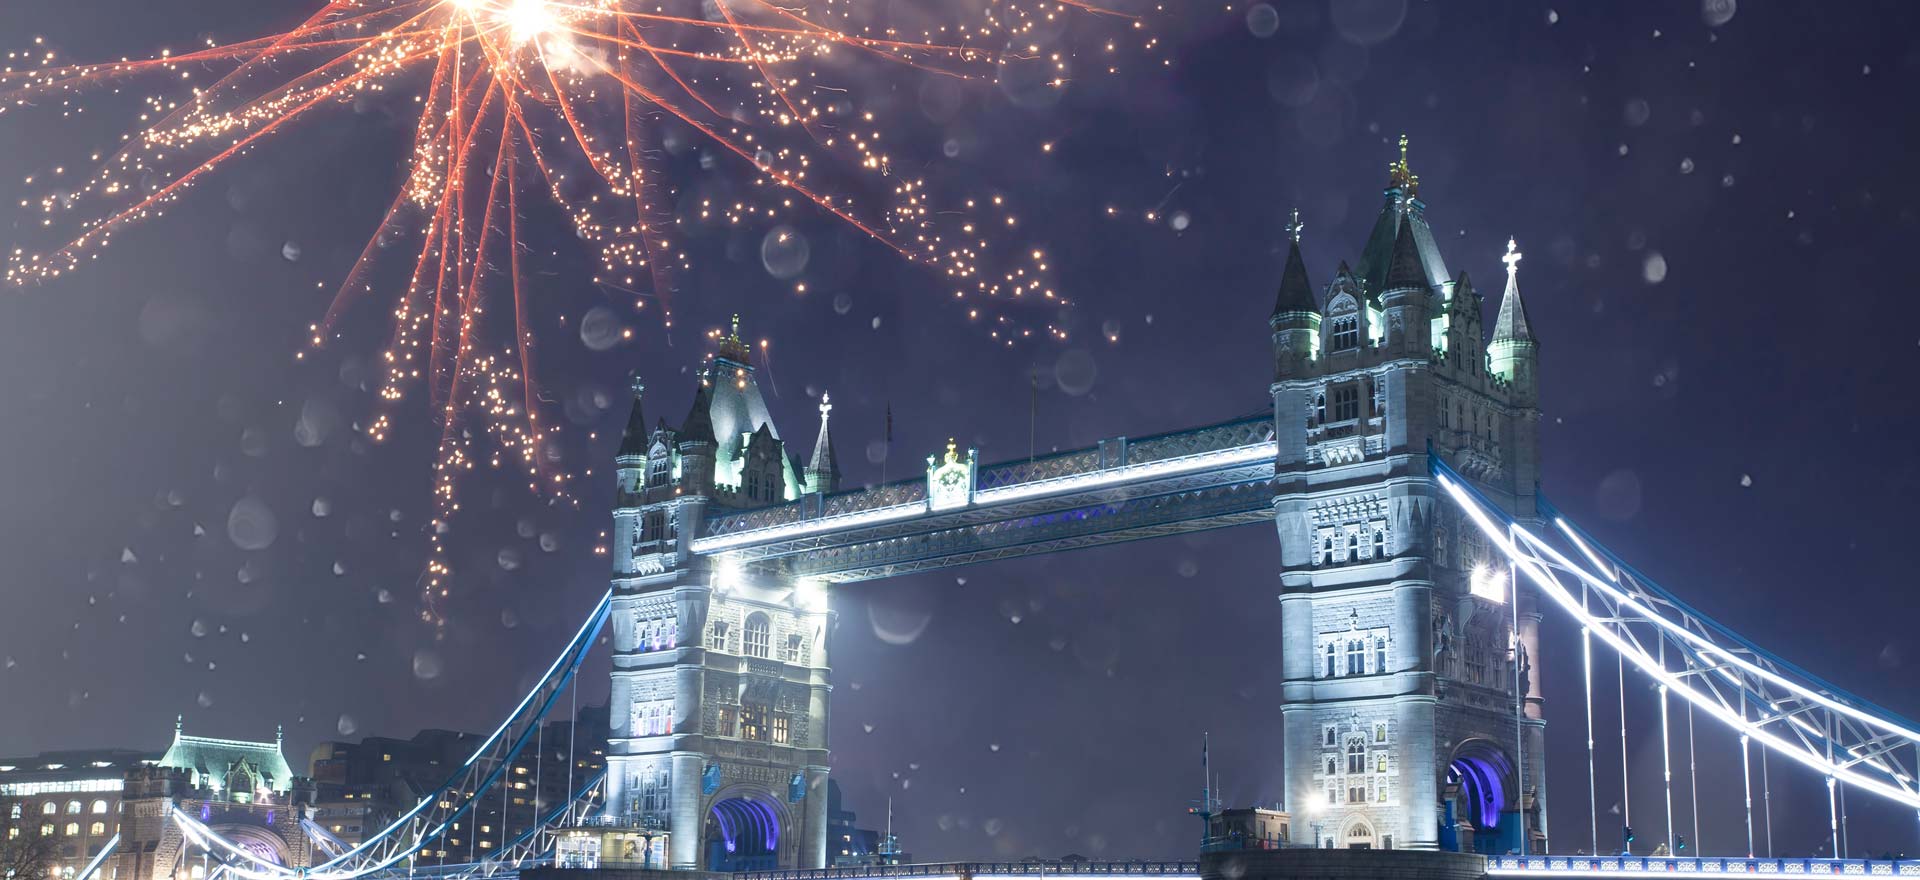 Last Chance to Get Tickets for Londons NYE Firework Display